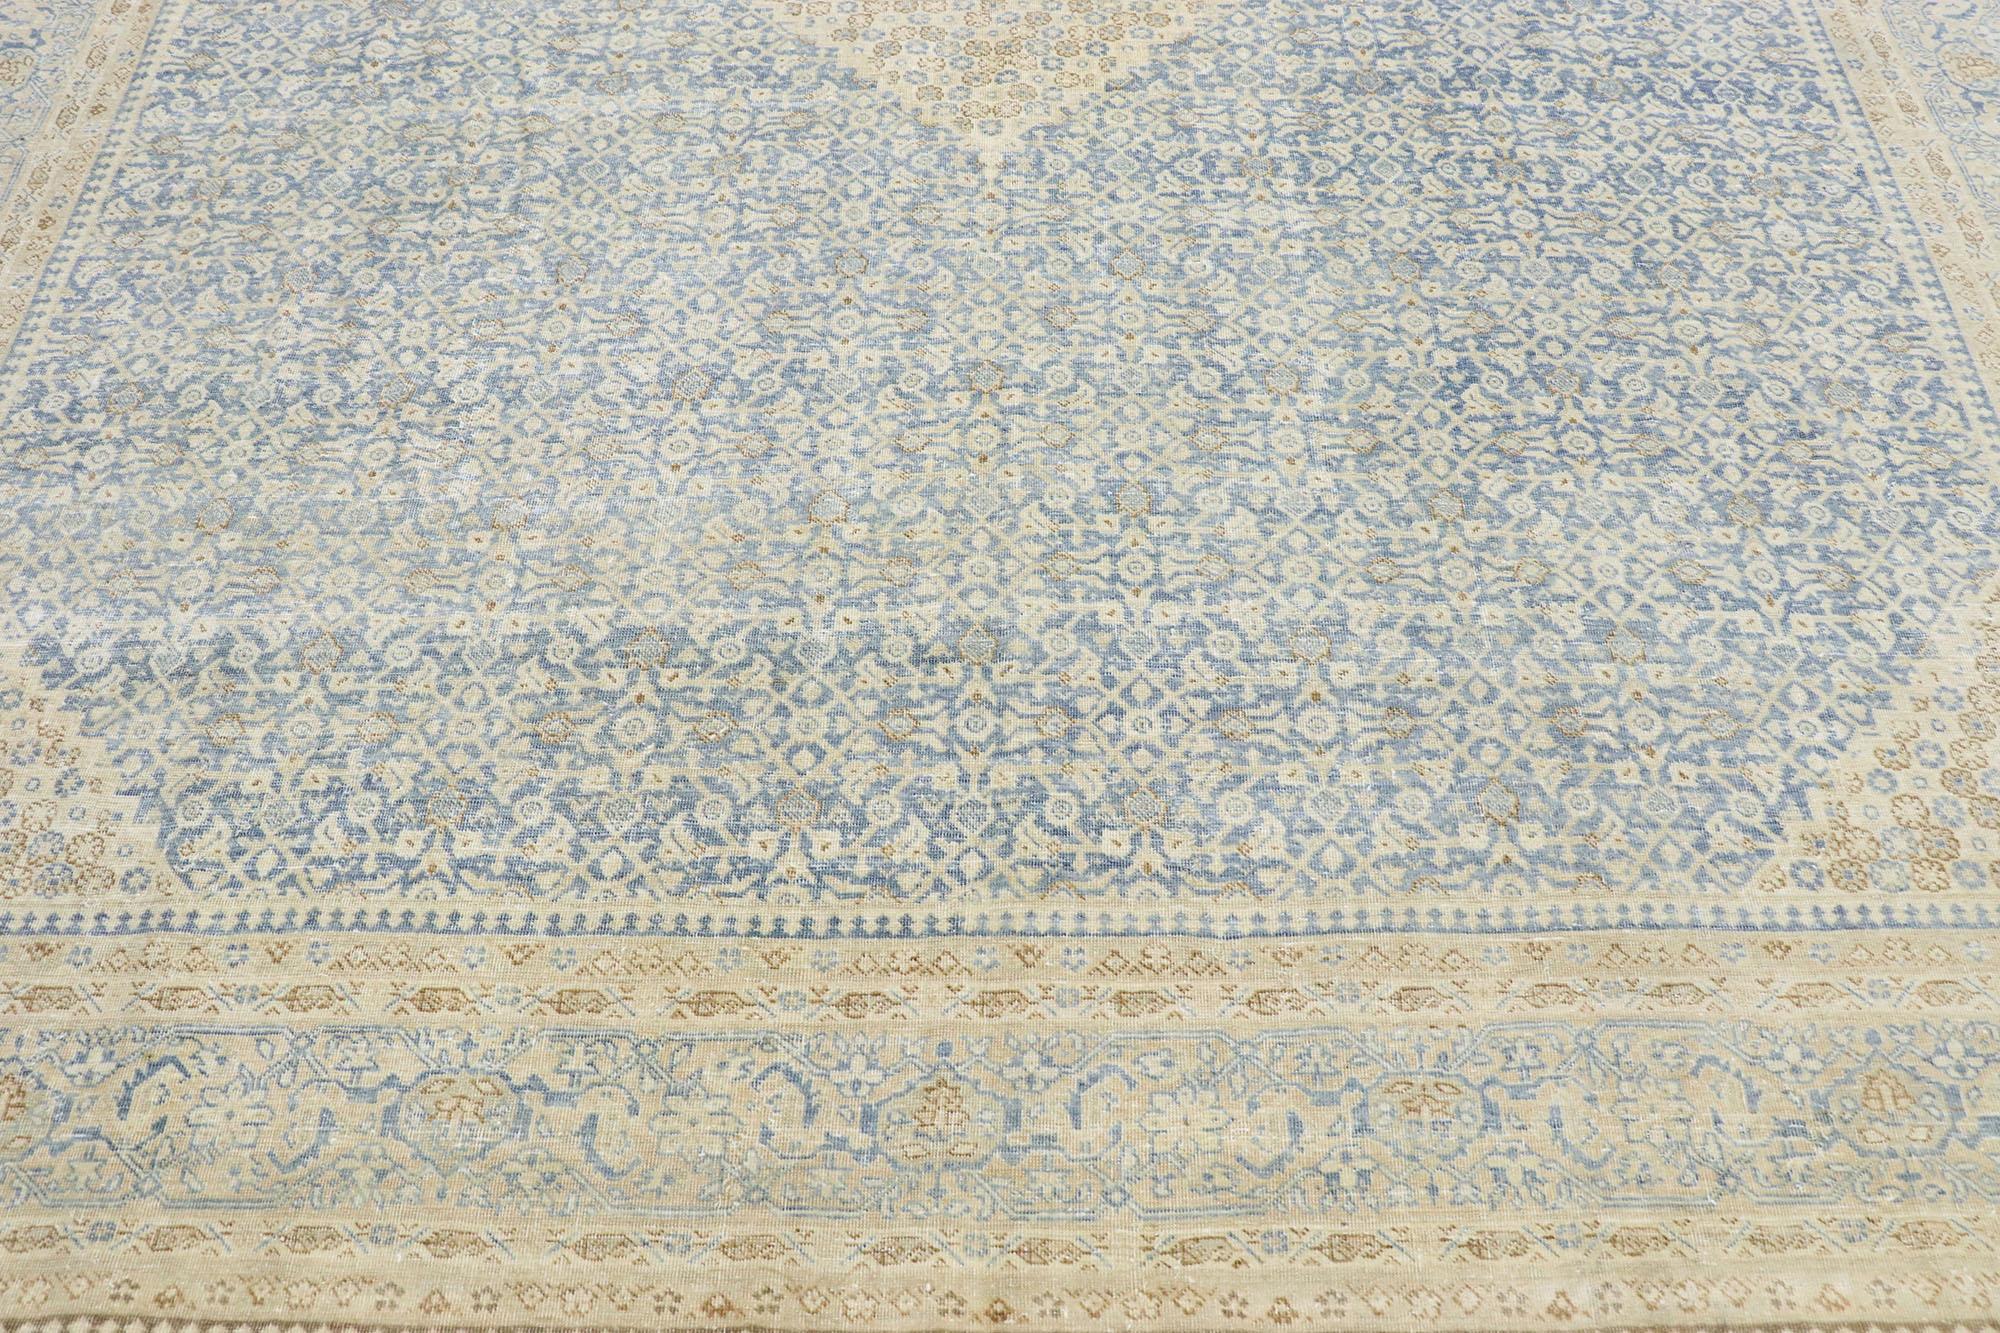 Distressed Antique Persian Tabriz Rug with Transitional Coastal Style In Distressed Condition For Sale In Dallas, TX